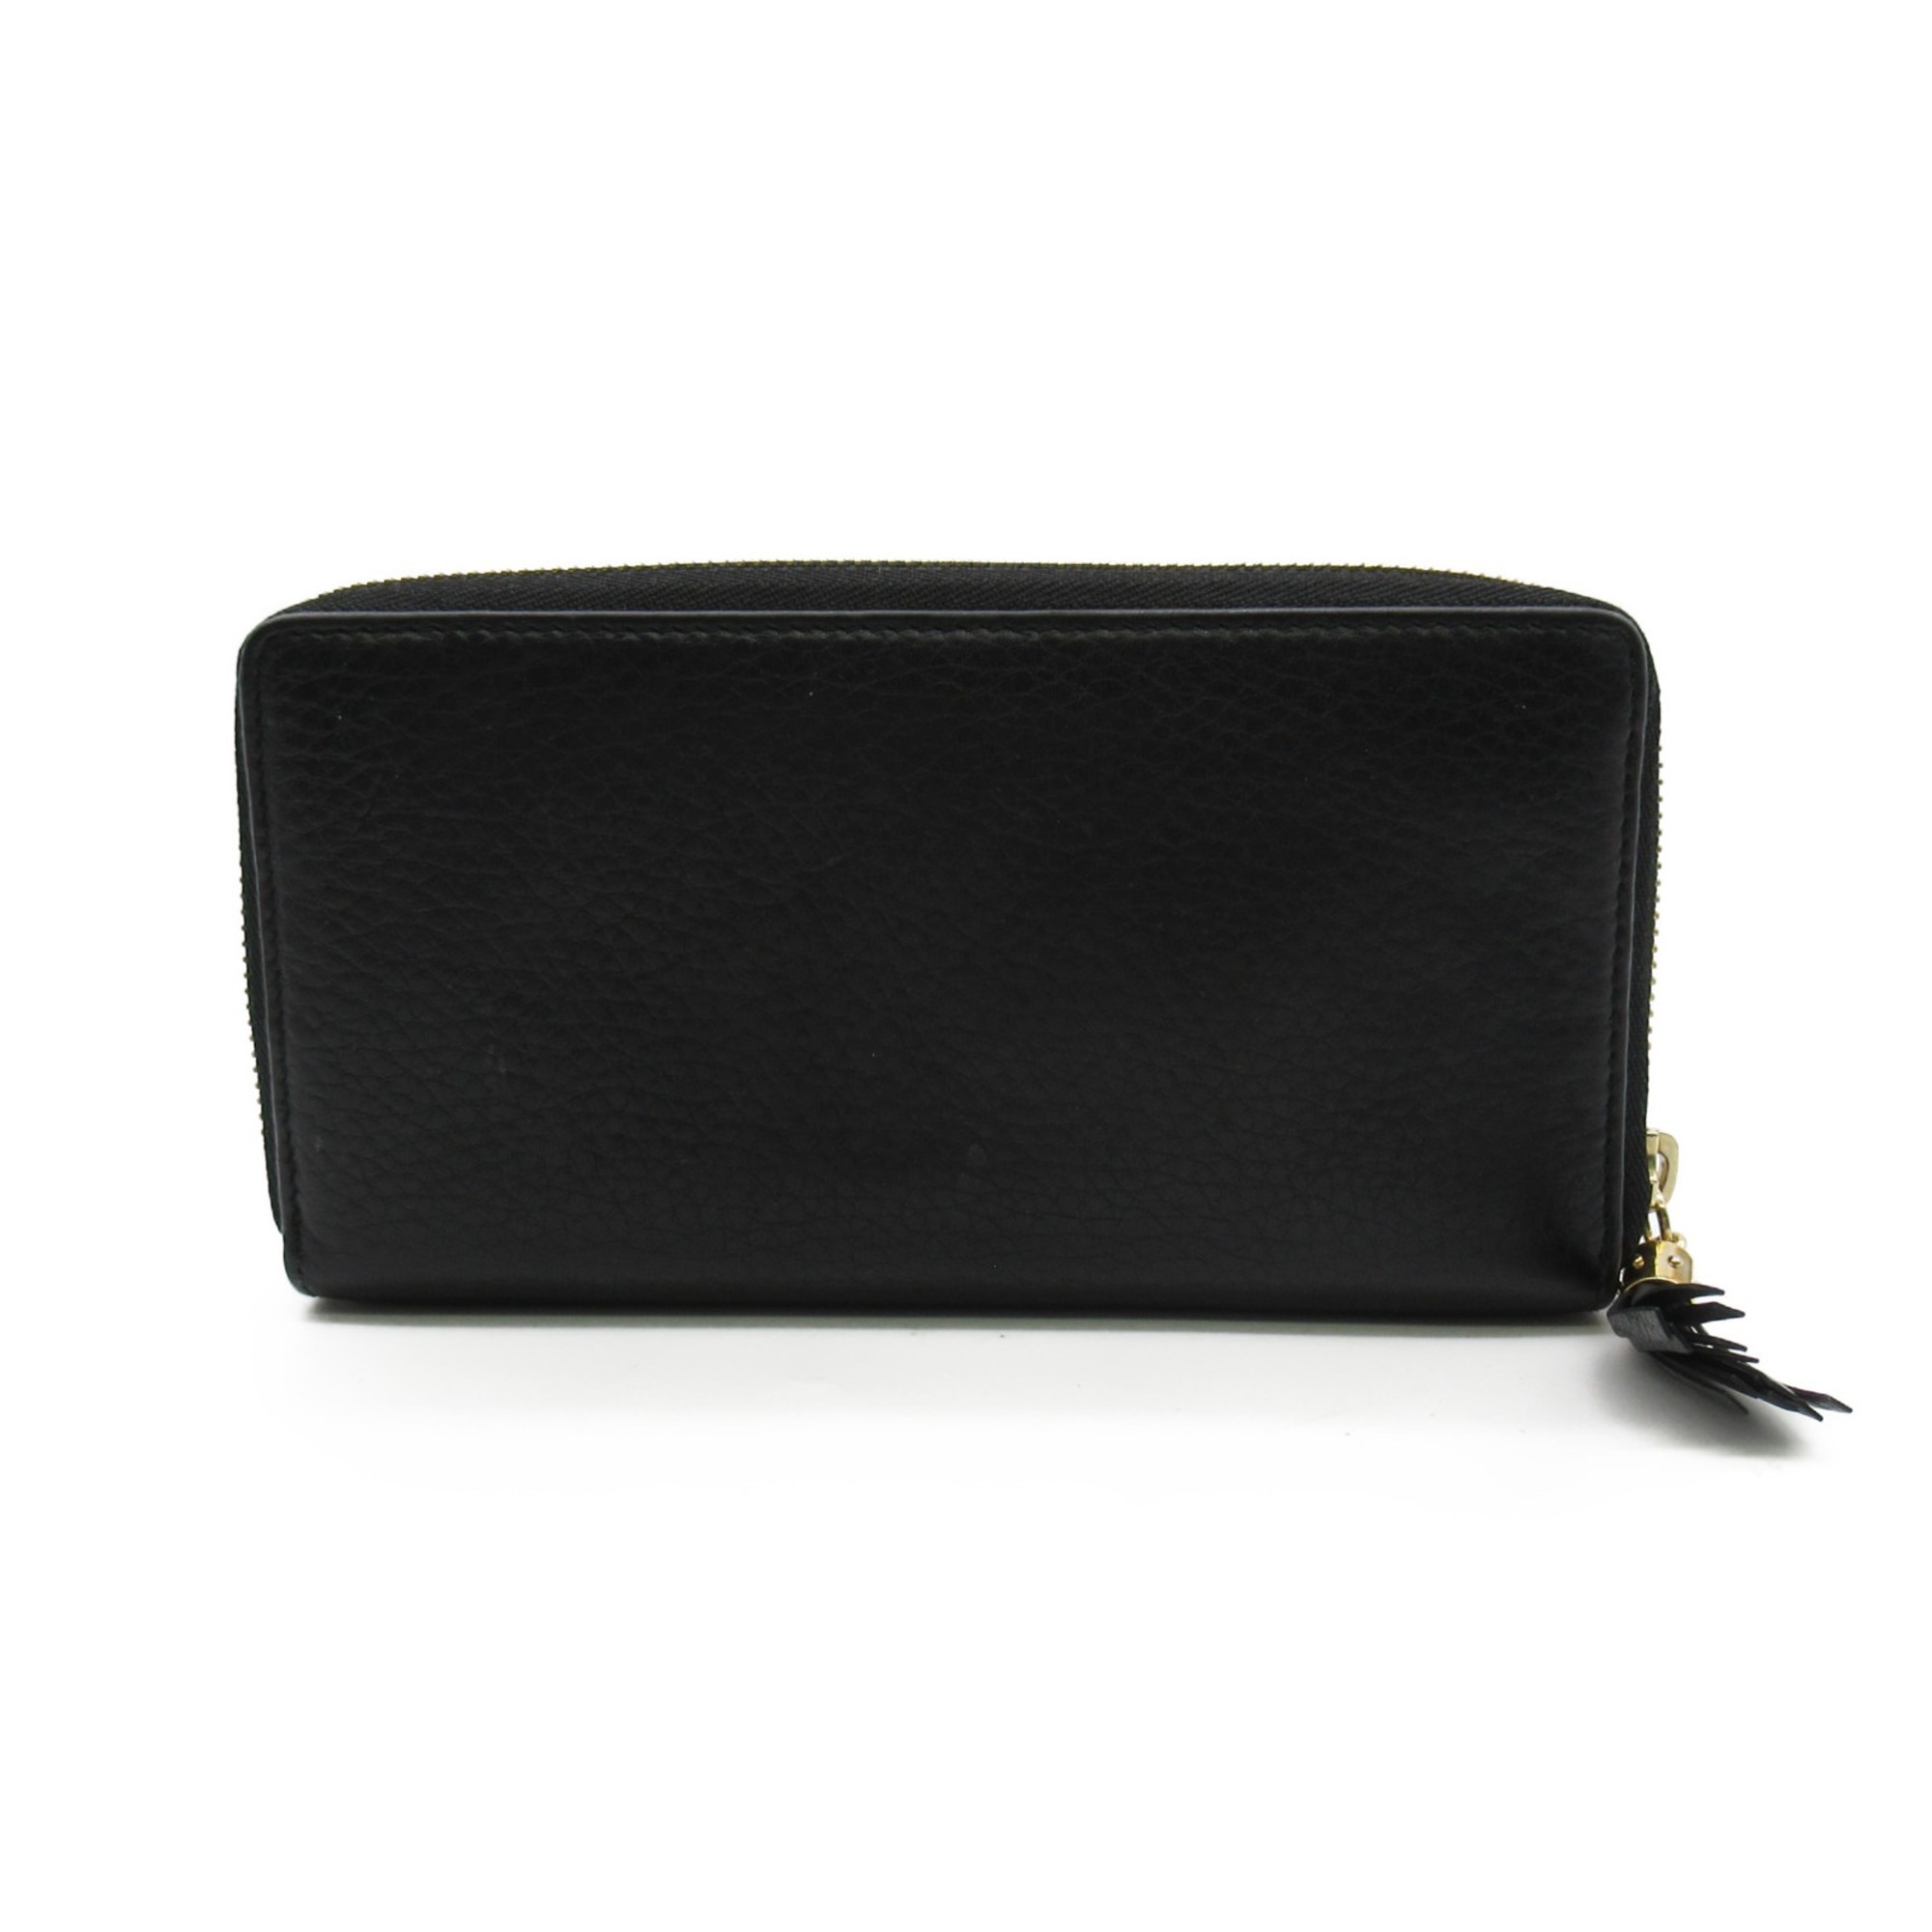 GUCCI Round long wallet Black leather 308004